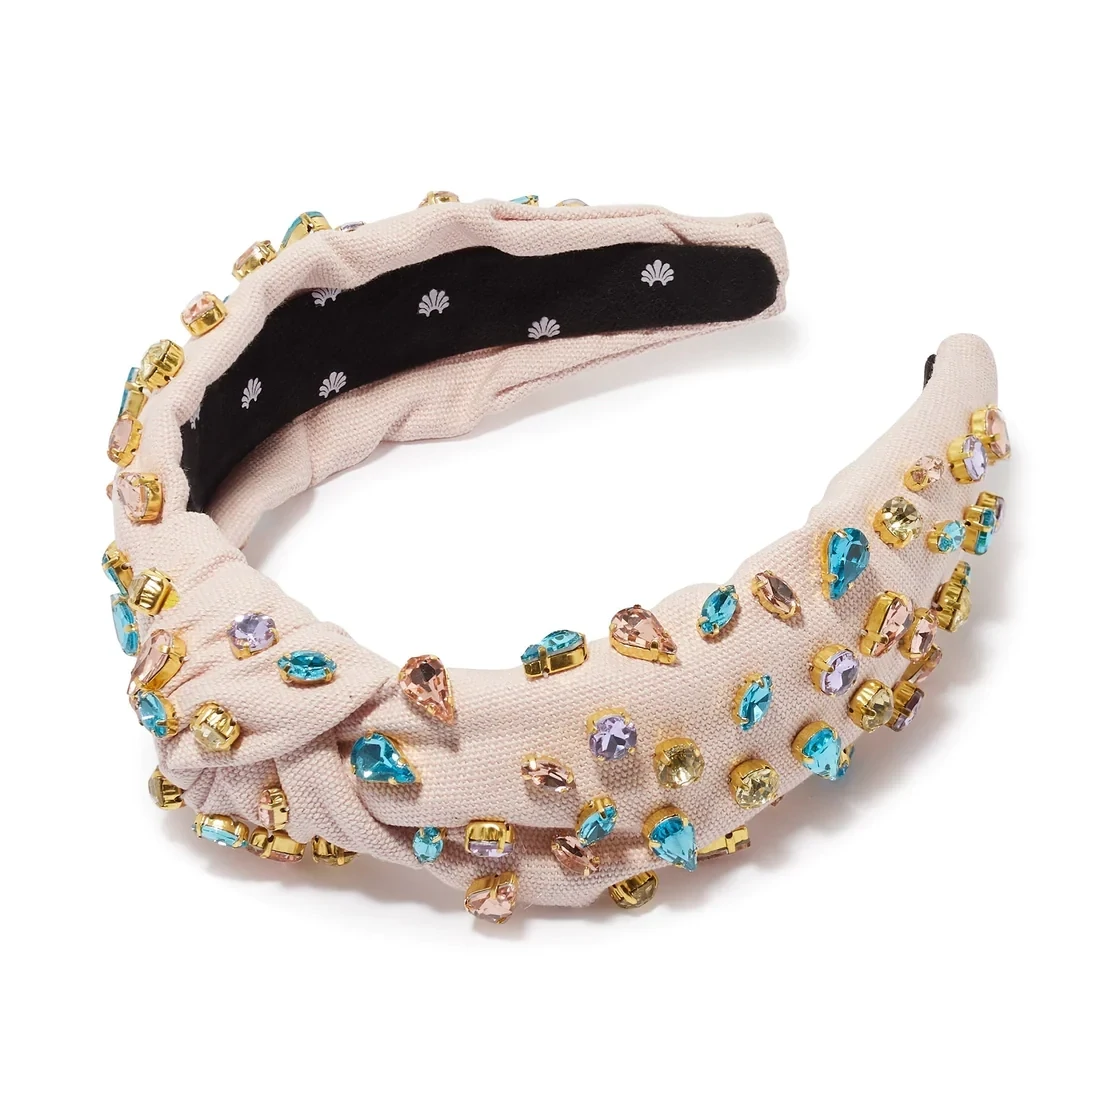 Candy Jeweled Knotted Headband, Color: Pastel Garden 650